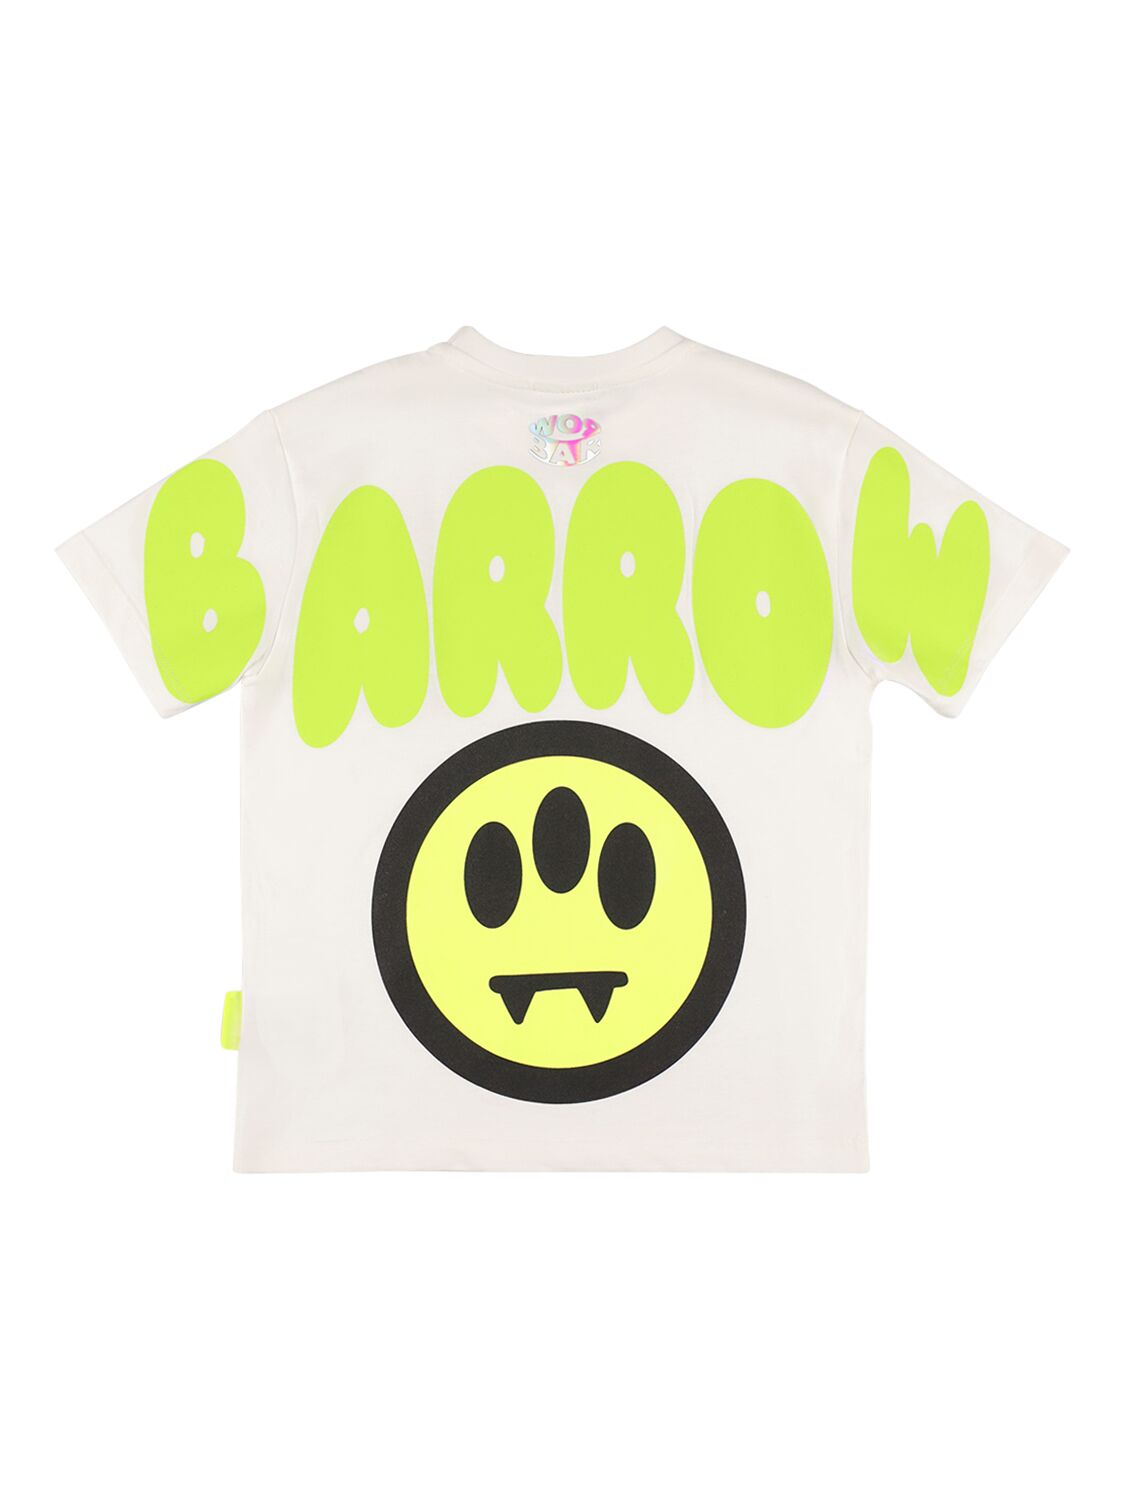 Barrow Kids' Printed Cotton Jersey T-shirt In Off-white